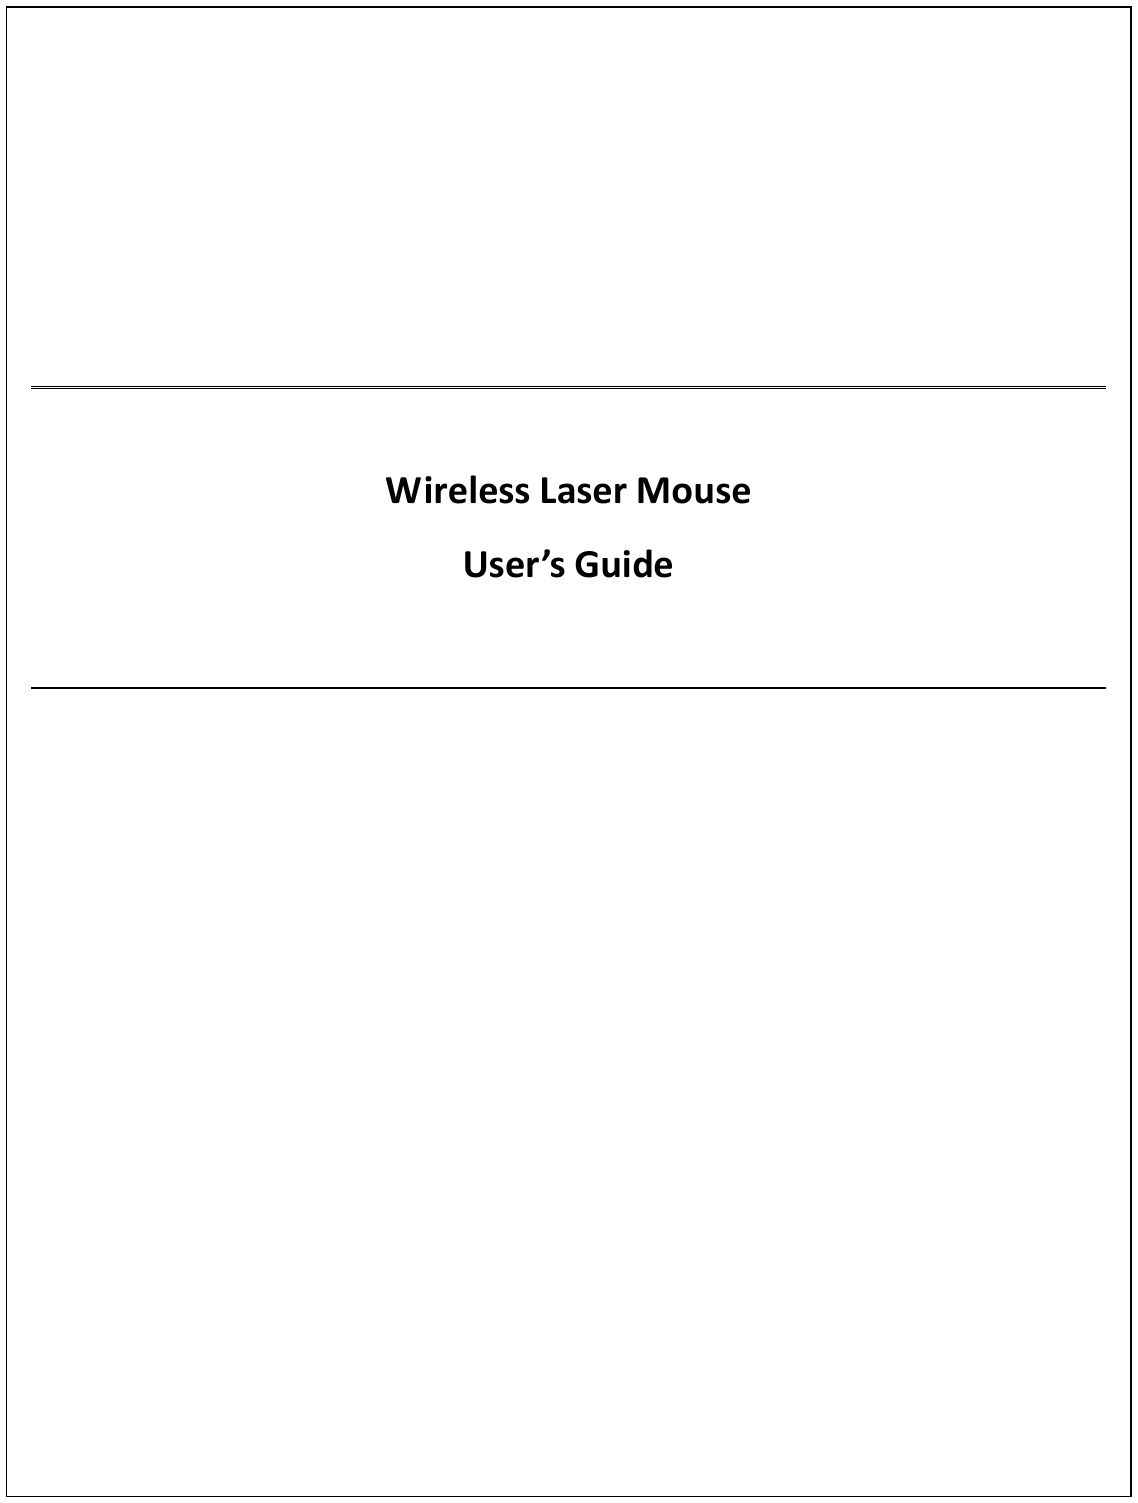             Wireless Laser Mouse User’s Guide   